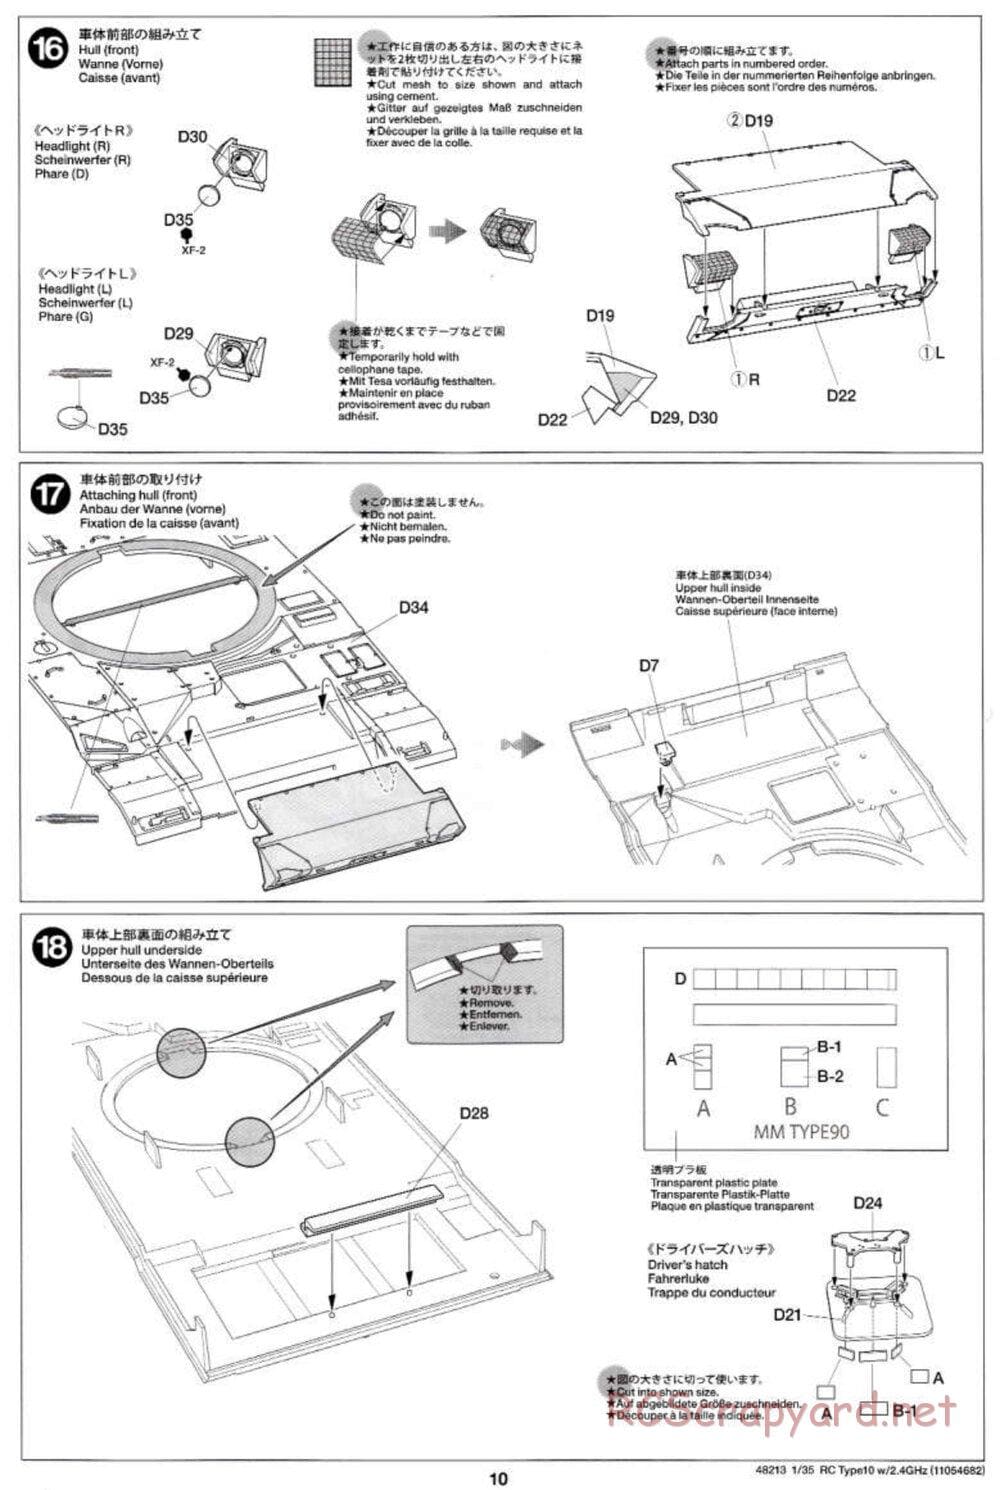 Tamiya - JGSDF Type 10 Tank - 1/35 Scale Chassis - Manual - Page 10